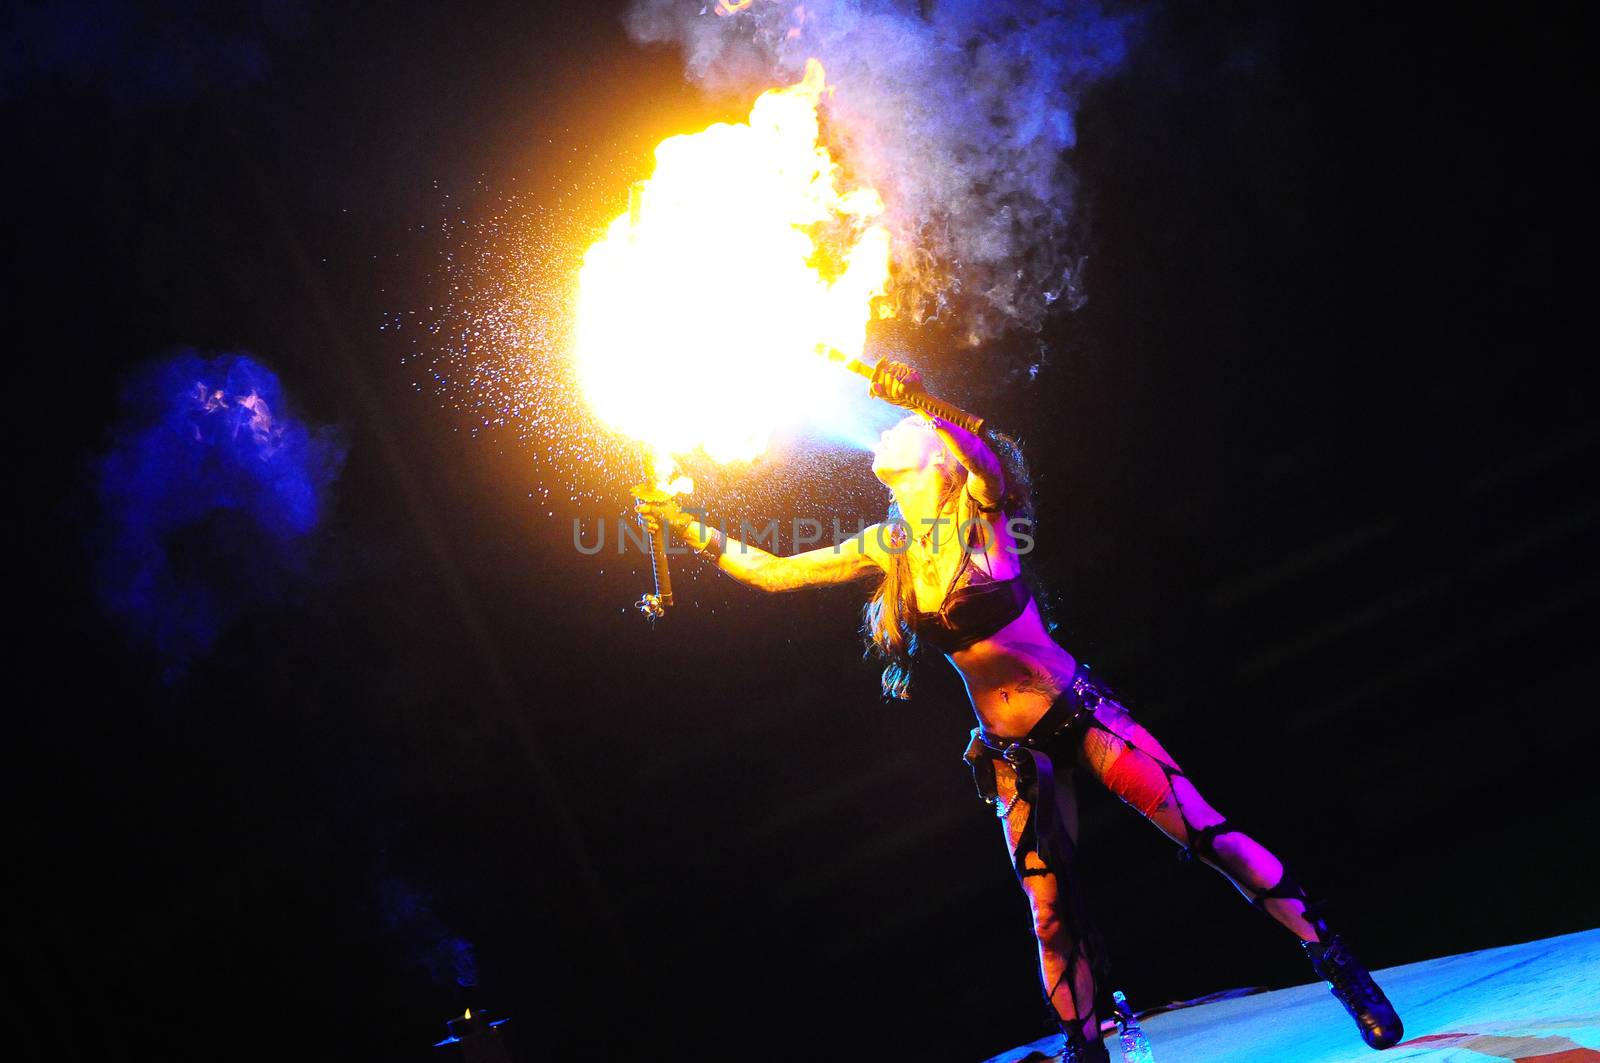 SERBIA, BELGRADE - APRIL 26, 2012: Sexy girl lighting a torch during Masters of dirt show, most thrilling and spectacular freestyle motocross show